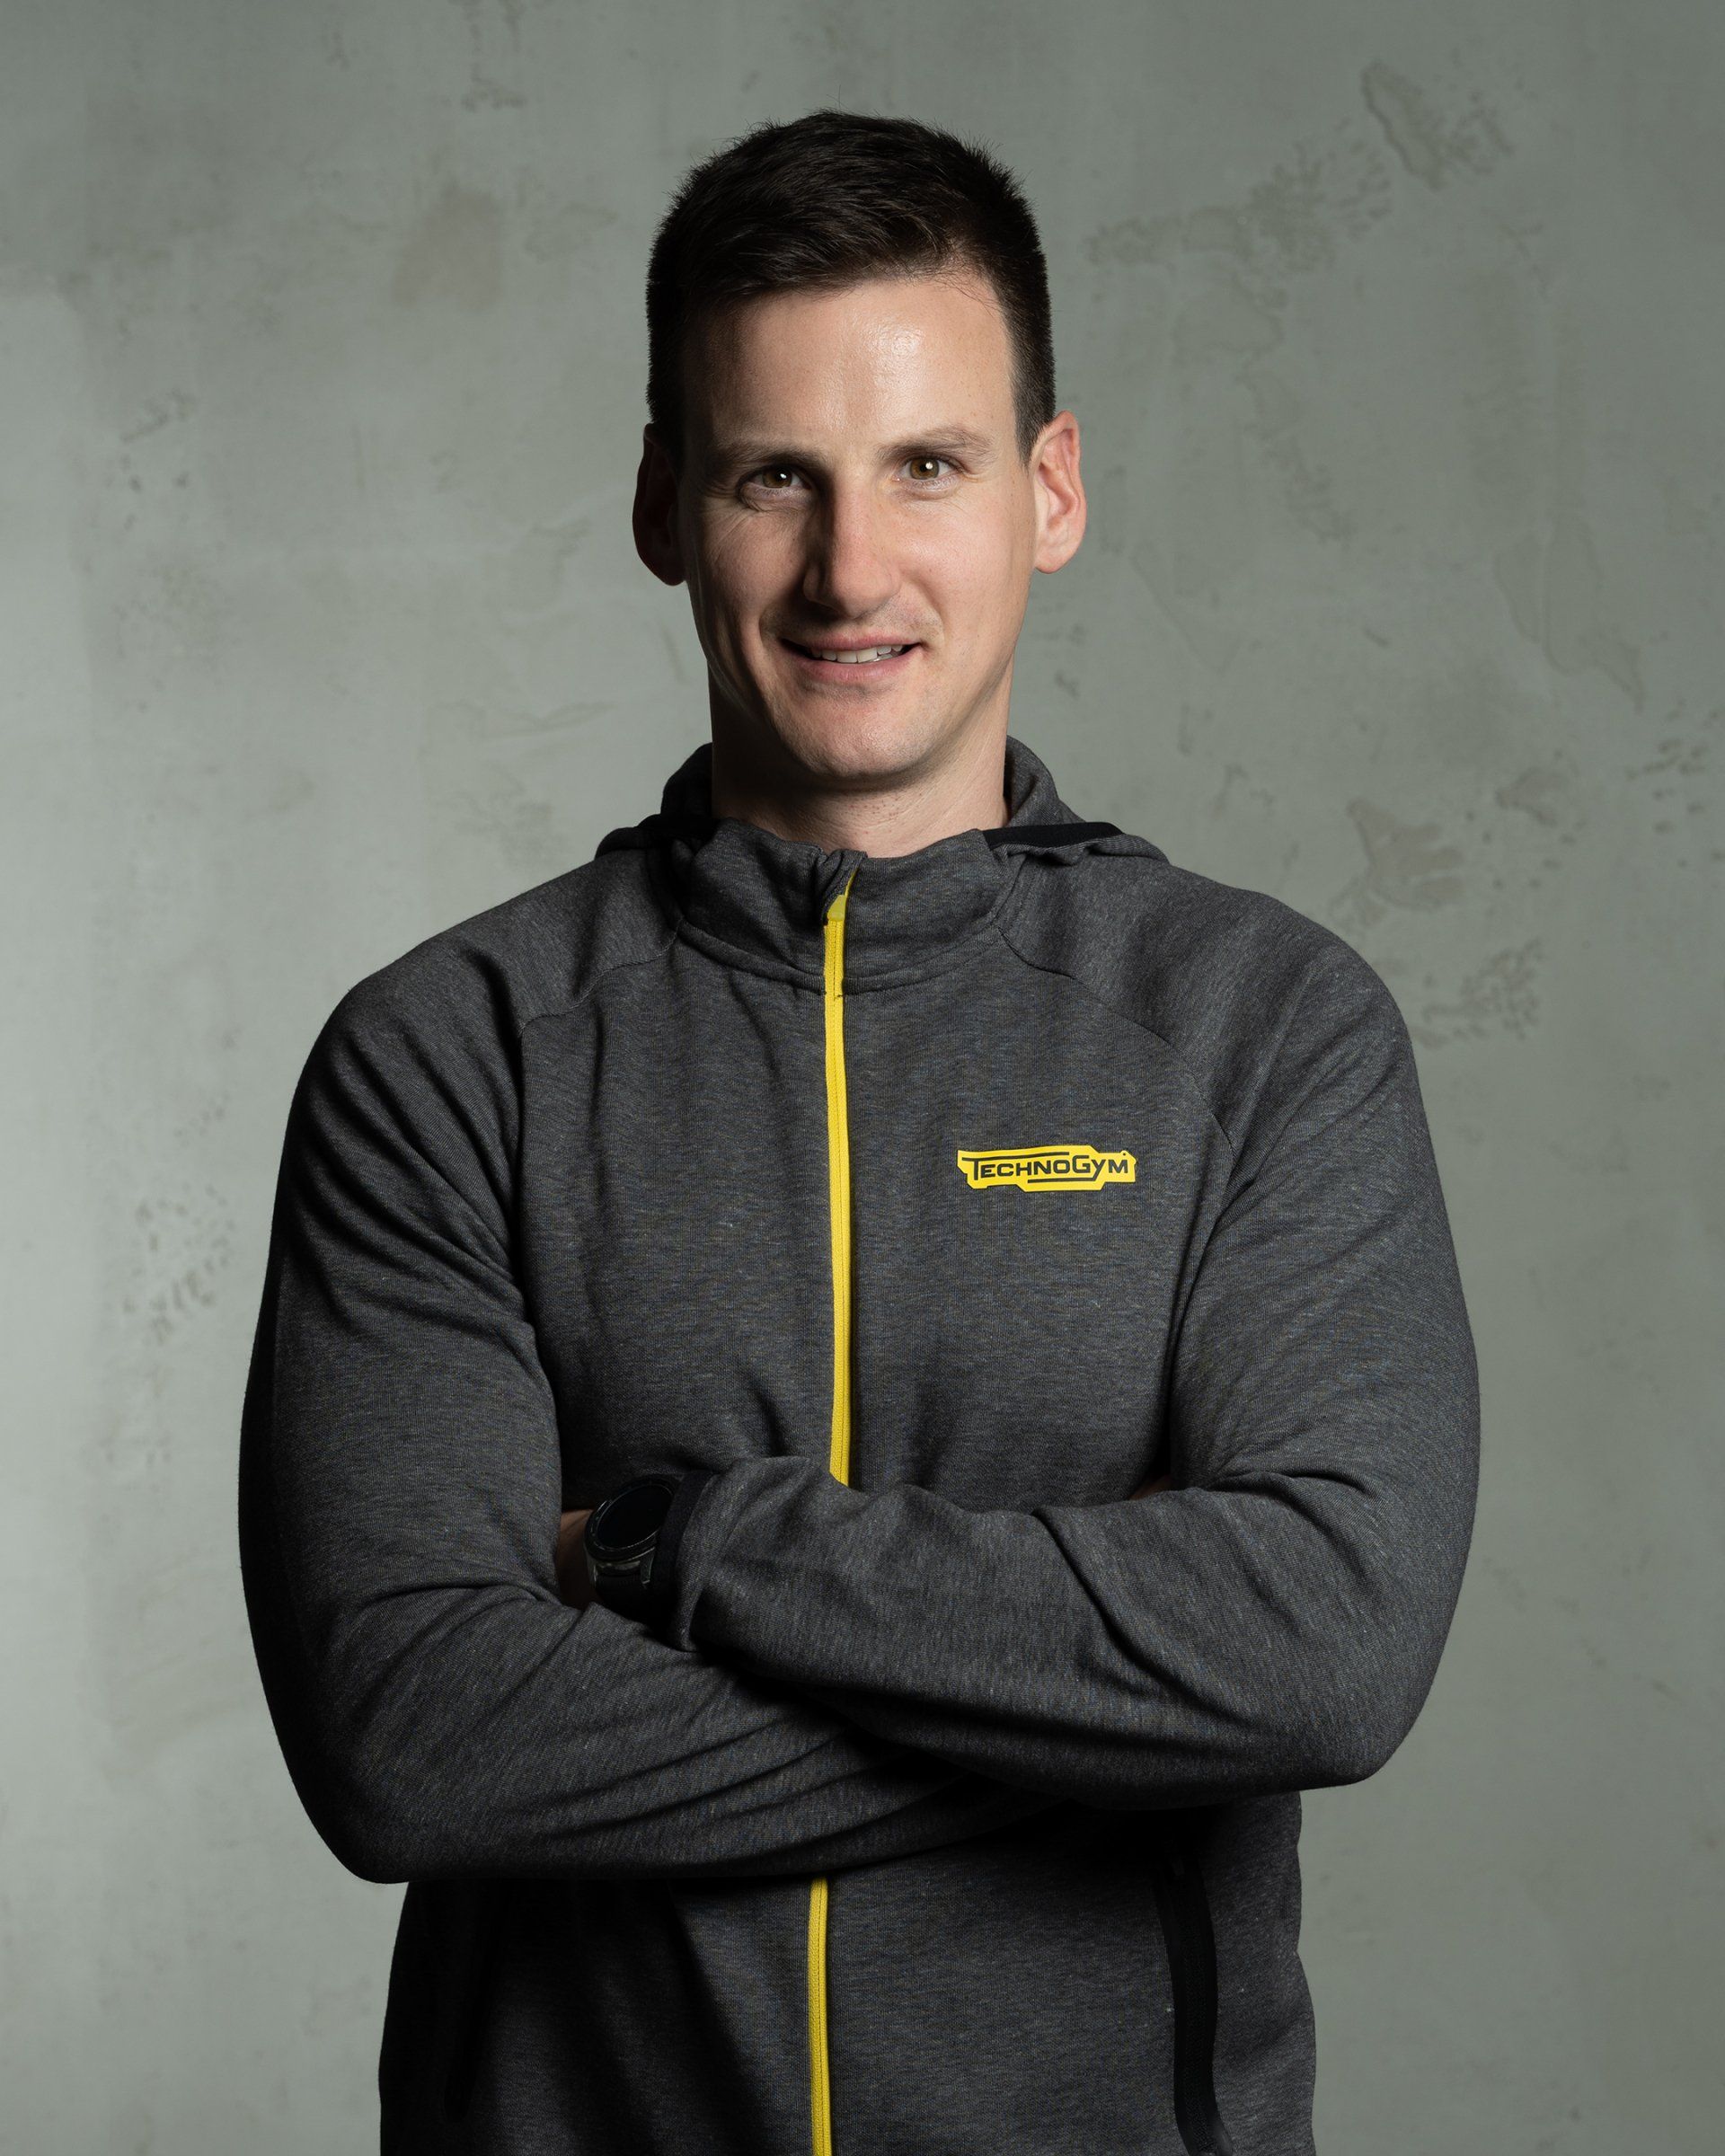 a man with his arms crossed is wearing a grey jacket with the word technogym on it